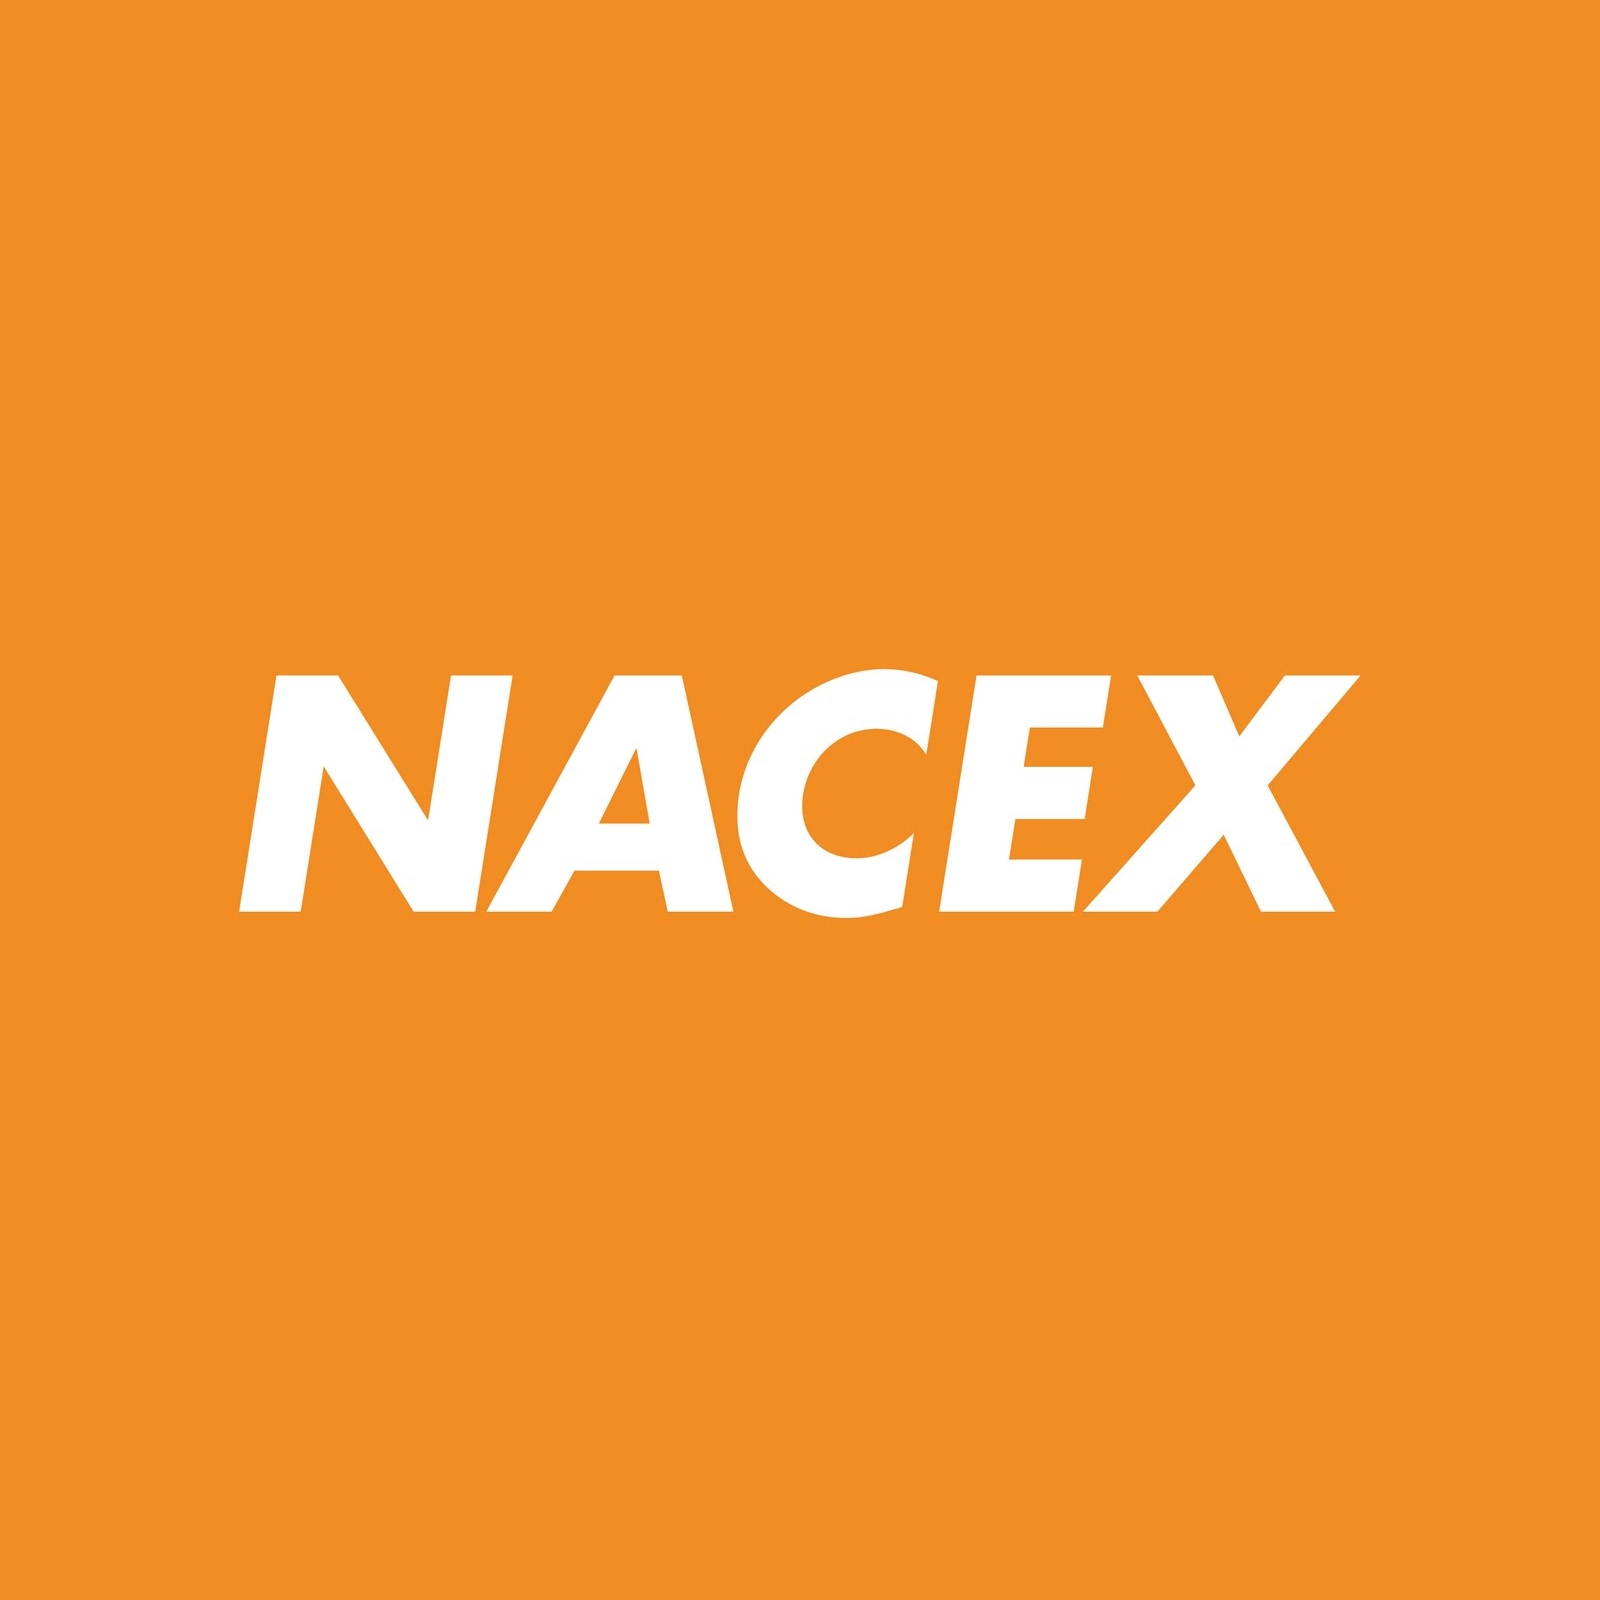 NACEX Spain tracking